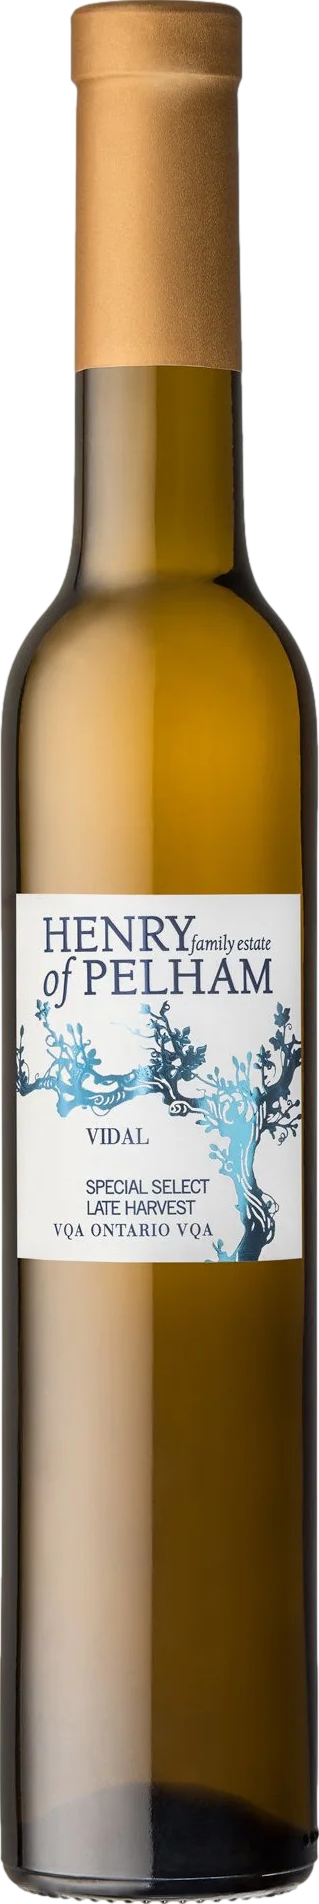 Product image of Henry of Pelham Special Select Late Harvest Vidal 2019 from 8wines